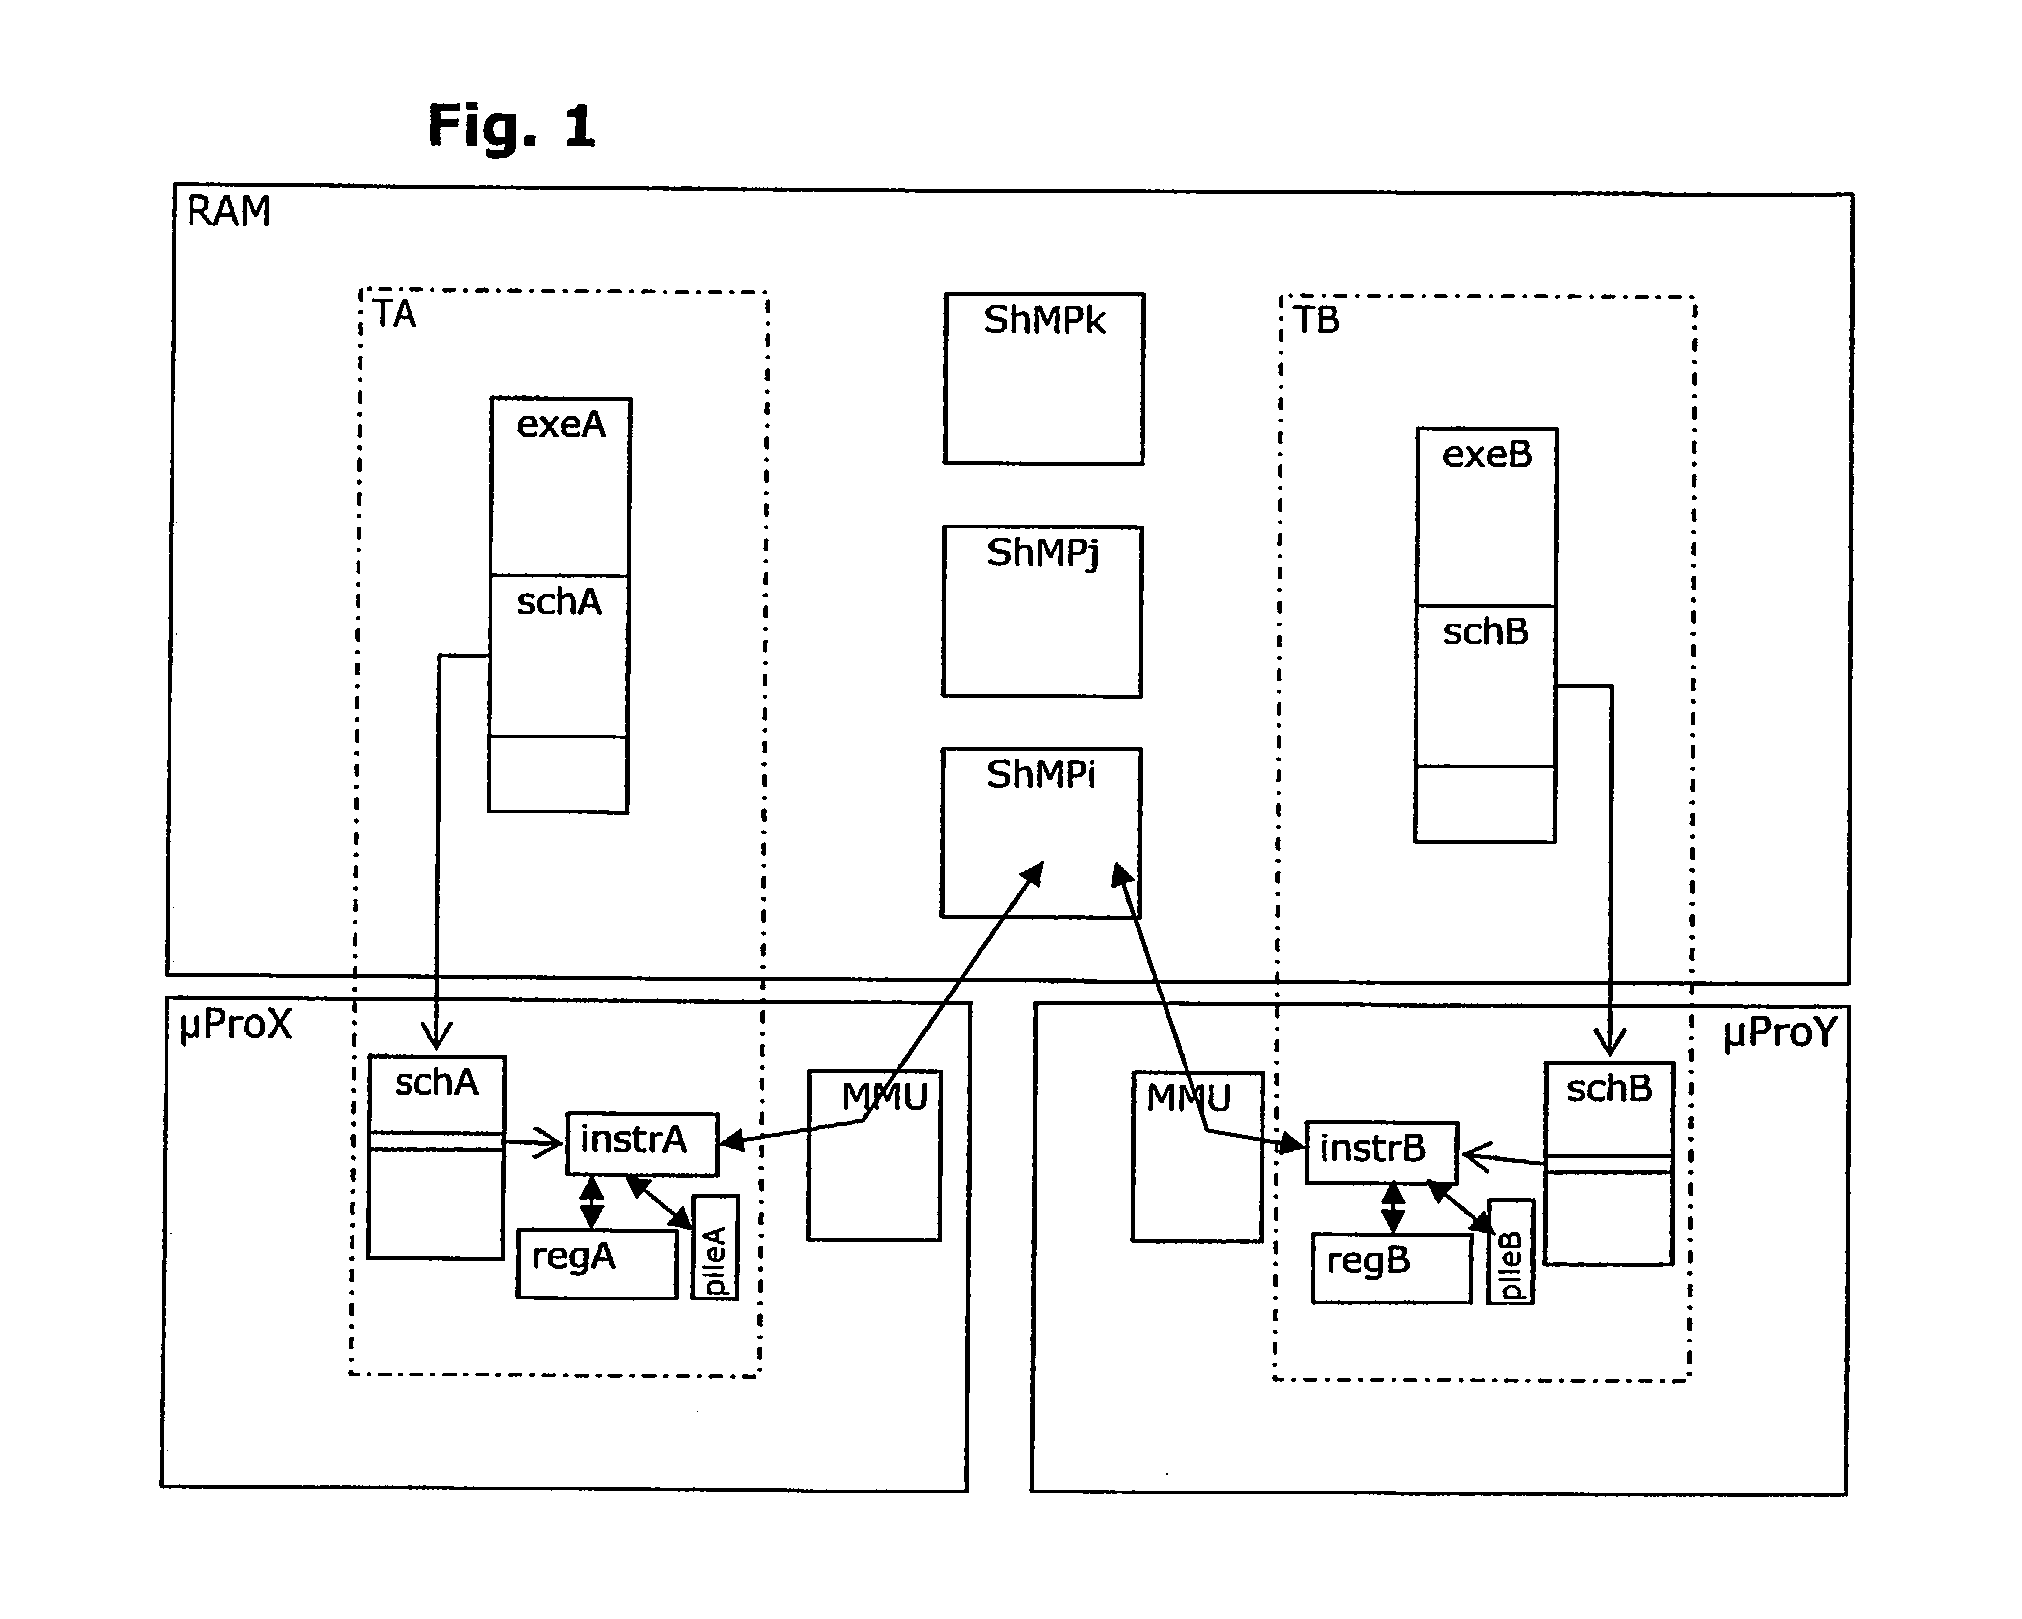 Method for Managing Access to Shared Resources in a Multi-Processor Environment